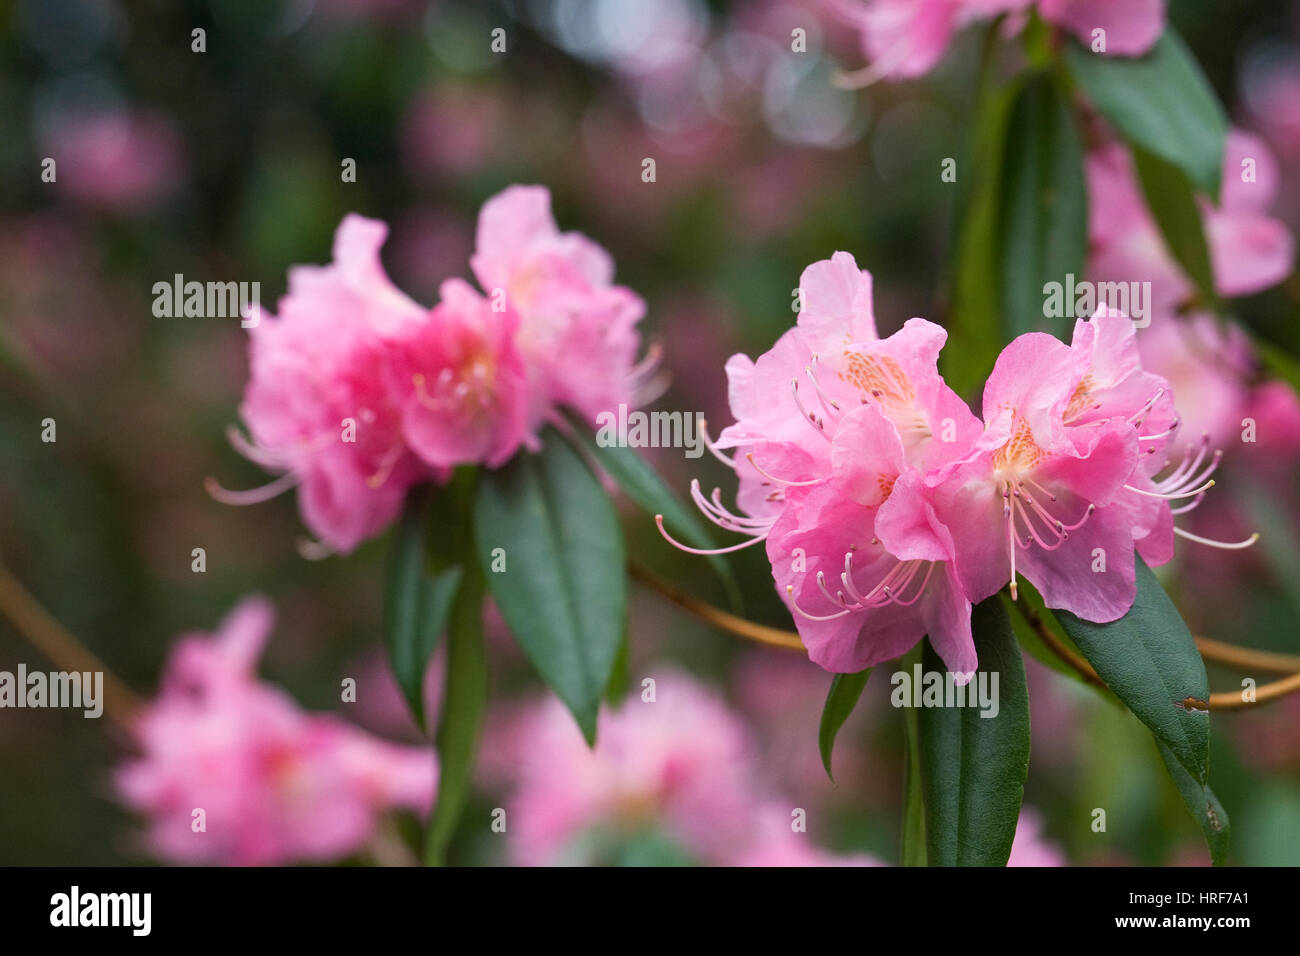 Rhododendron Airy Fairy flowers in Early Spring, Stock Photo